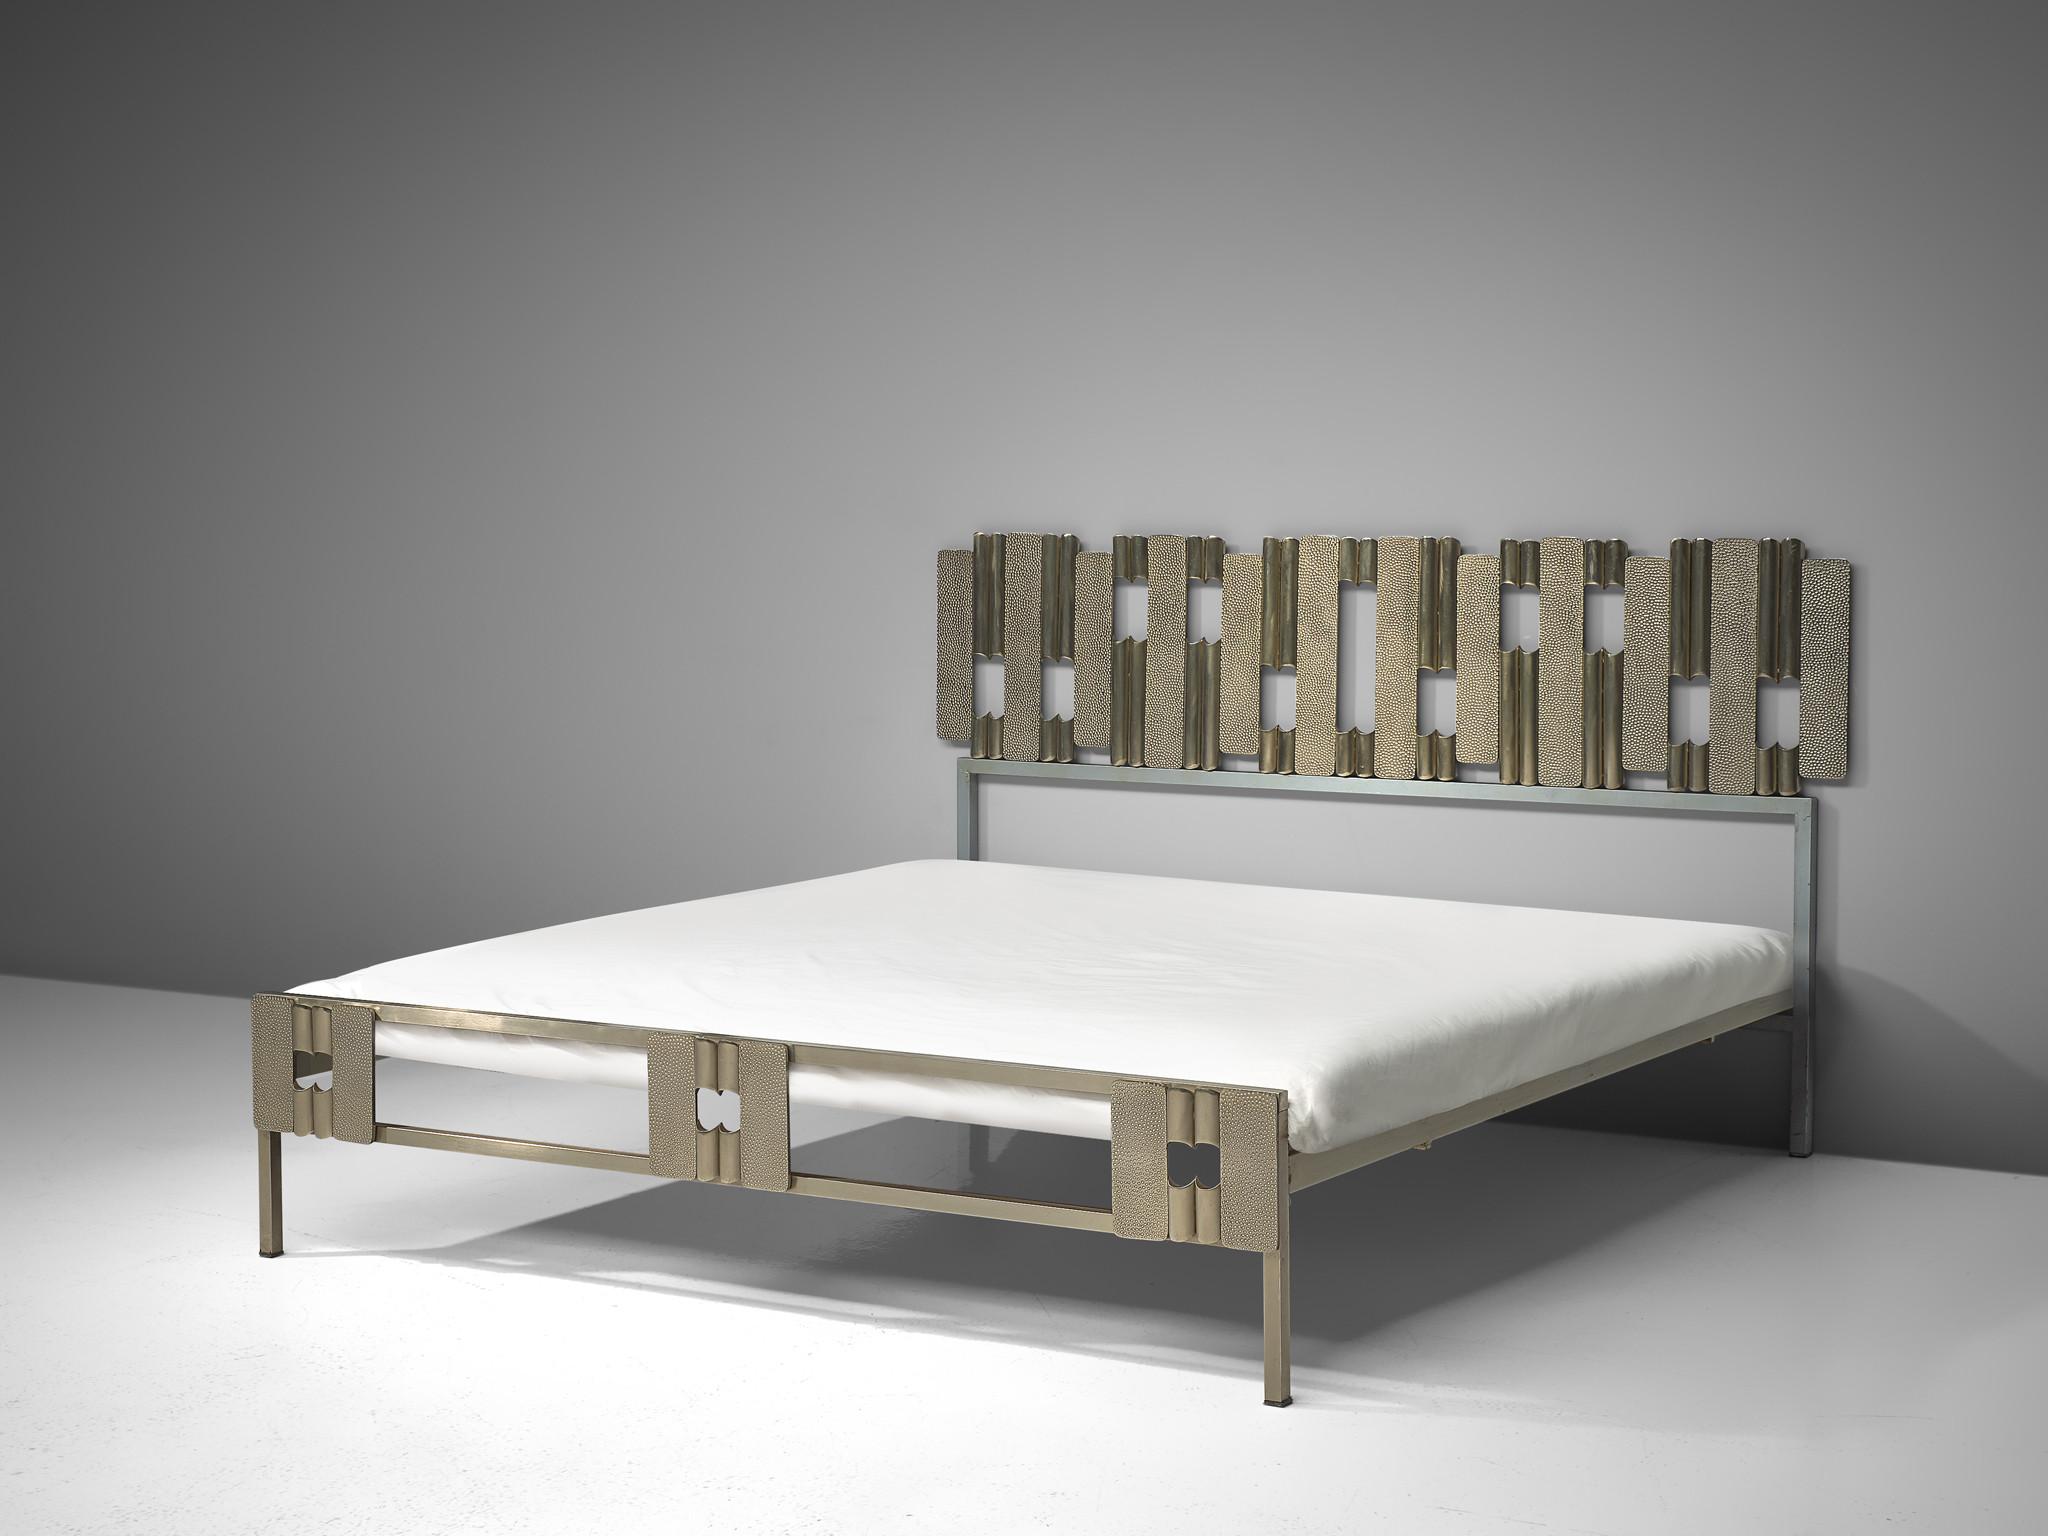 Luciano Frigerio, bed with headboard, hammered steel, Italy, 1970s

Beautiful bed by Italian sculptor and artist Luciano Frigerio. This Brutalist inspired bed was produced circa 1970 and features a stunning headboard consisting of a variety in